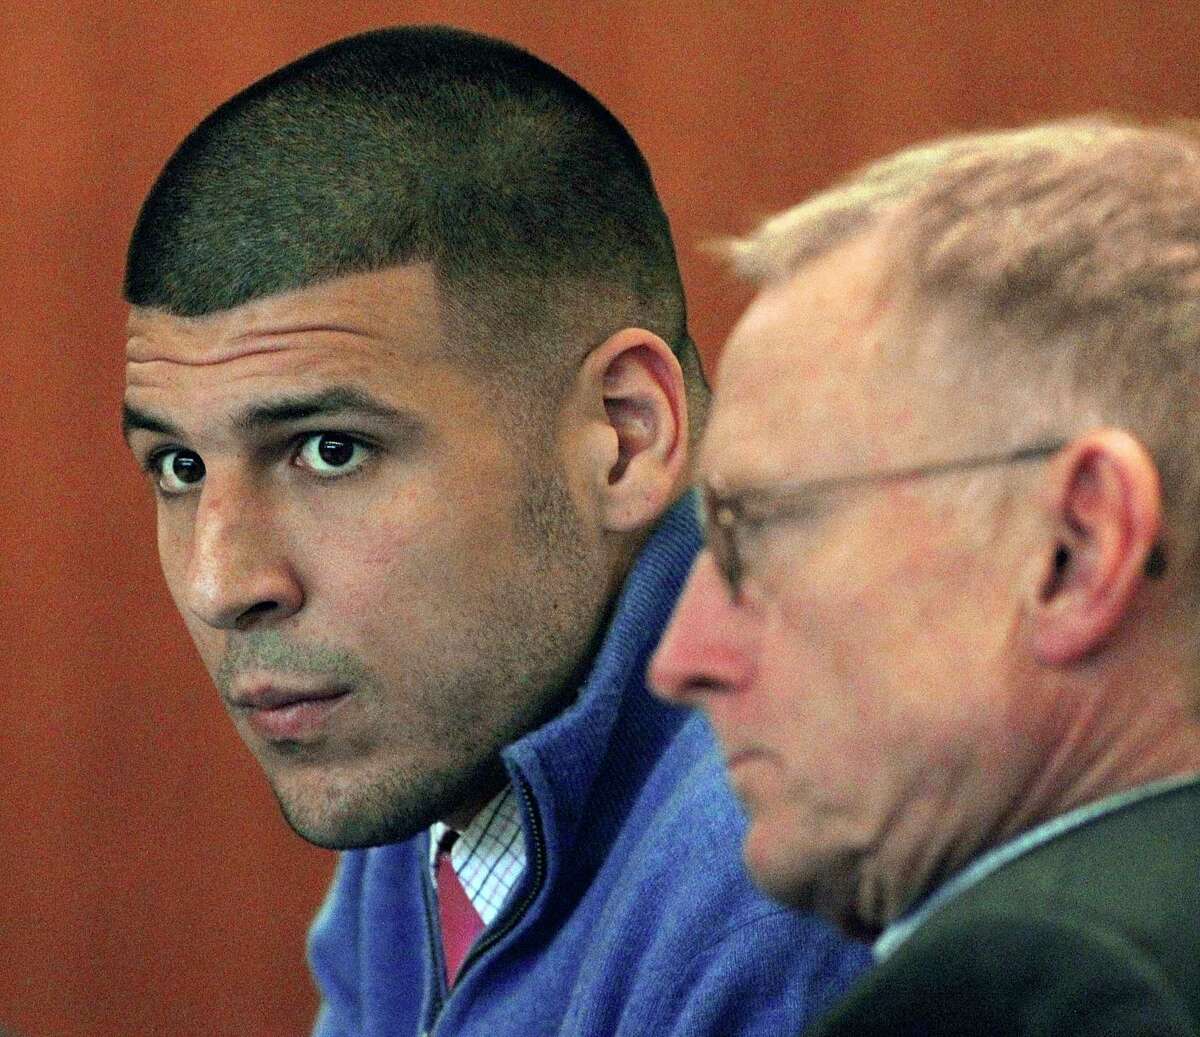 Aaron Hernandez’s lawyers asked a judge to order prosecutors to pare down their list of more than 300 witnesses, which includes Patriots coach Bill Belichick and owner Robert Kraft.